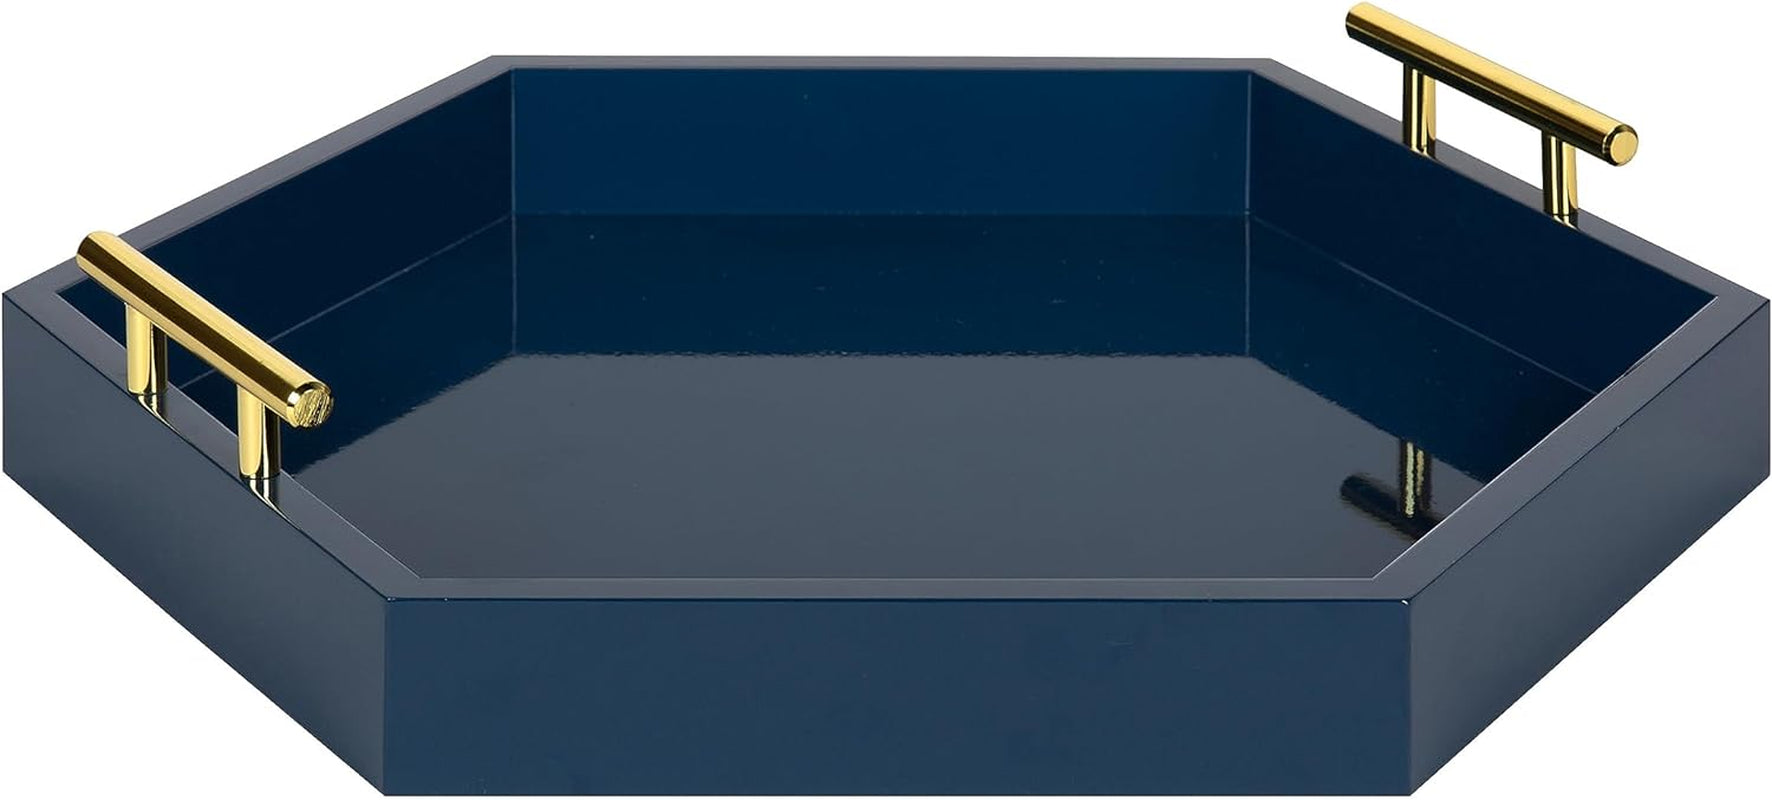 Lipton Hexagon Decorative Tray with Polished Metal Handles, Navy Blue and Gold